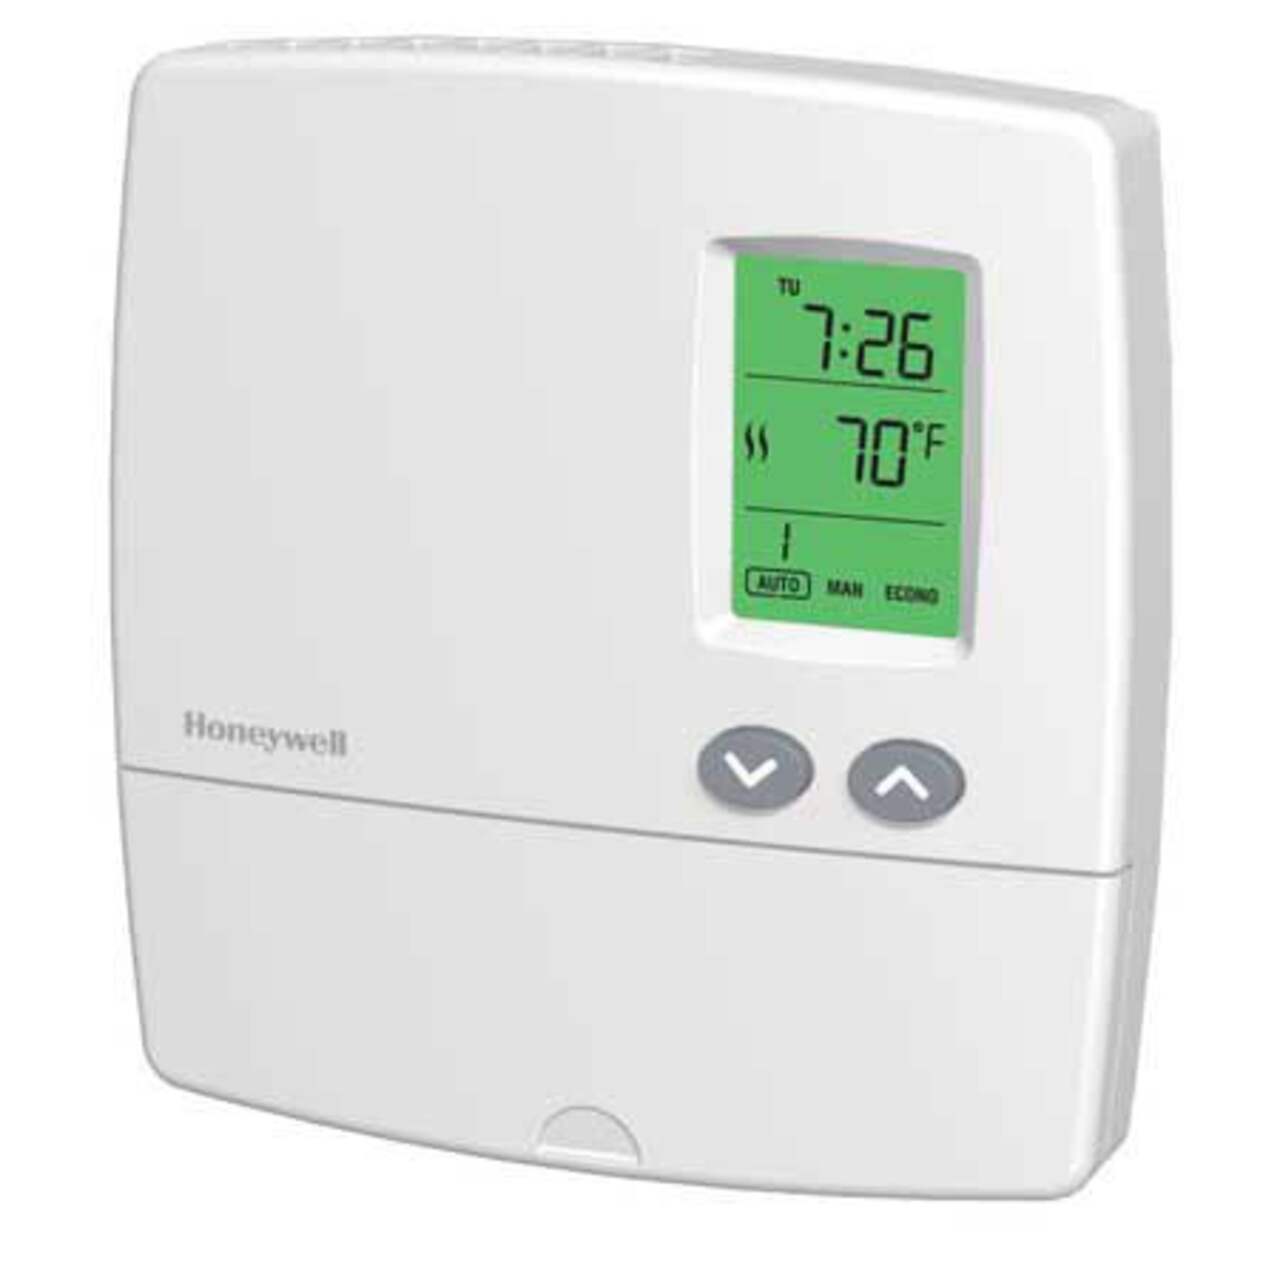 https://media-www.canadiantire.ca/product/fixing/home-environment/winter-climate-control/0528890/honeywell-5-2-electric-baseboard-thermostat-7e3ea329-d86f-4343-9f32-c8394f649a22-jpgrendition.jpg?imdensity=1&imwidth=640&impolicy=mZoom